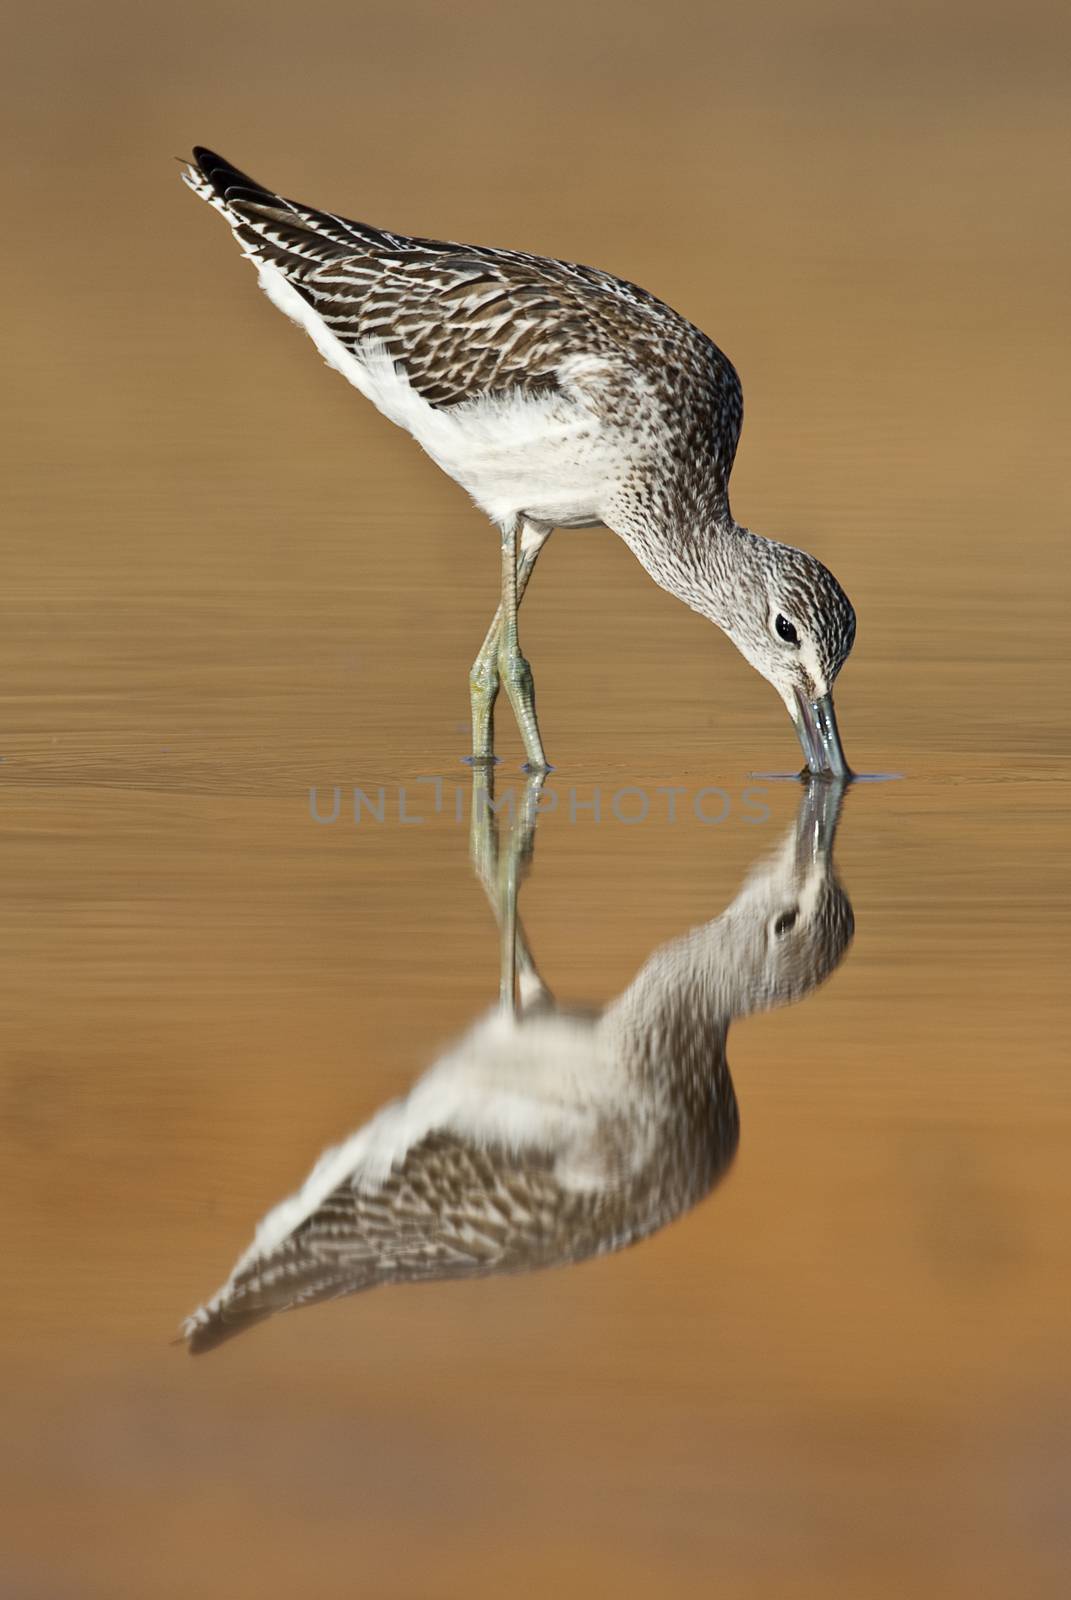 Common Greenshank, Tringa nebularia, Looking for food in the wat by jalonsohu@gmail.com